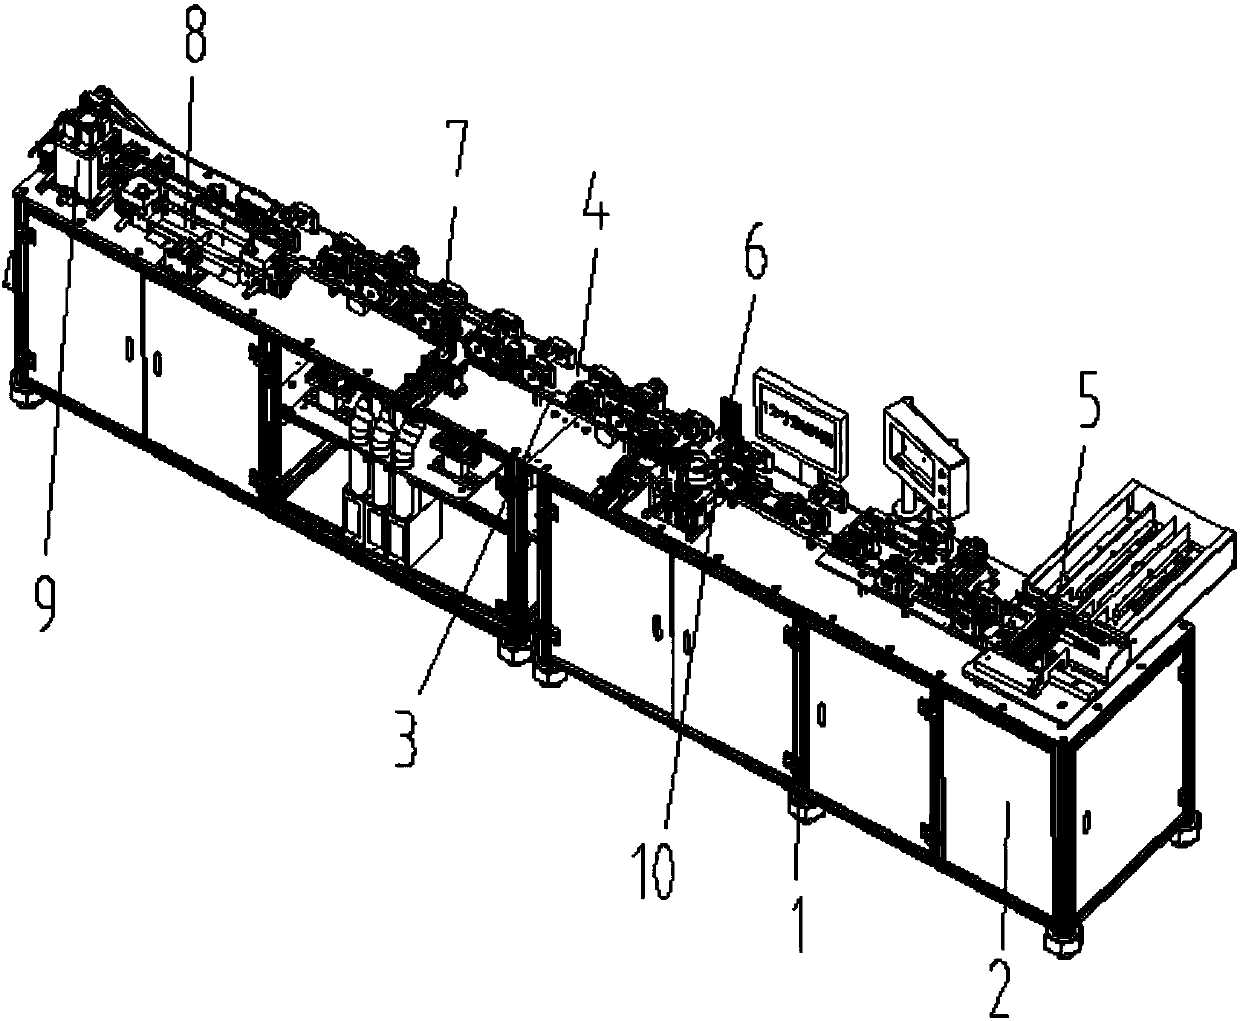 Automatic resistance sorting and detecting integrated machine